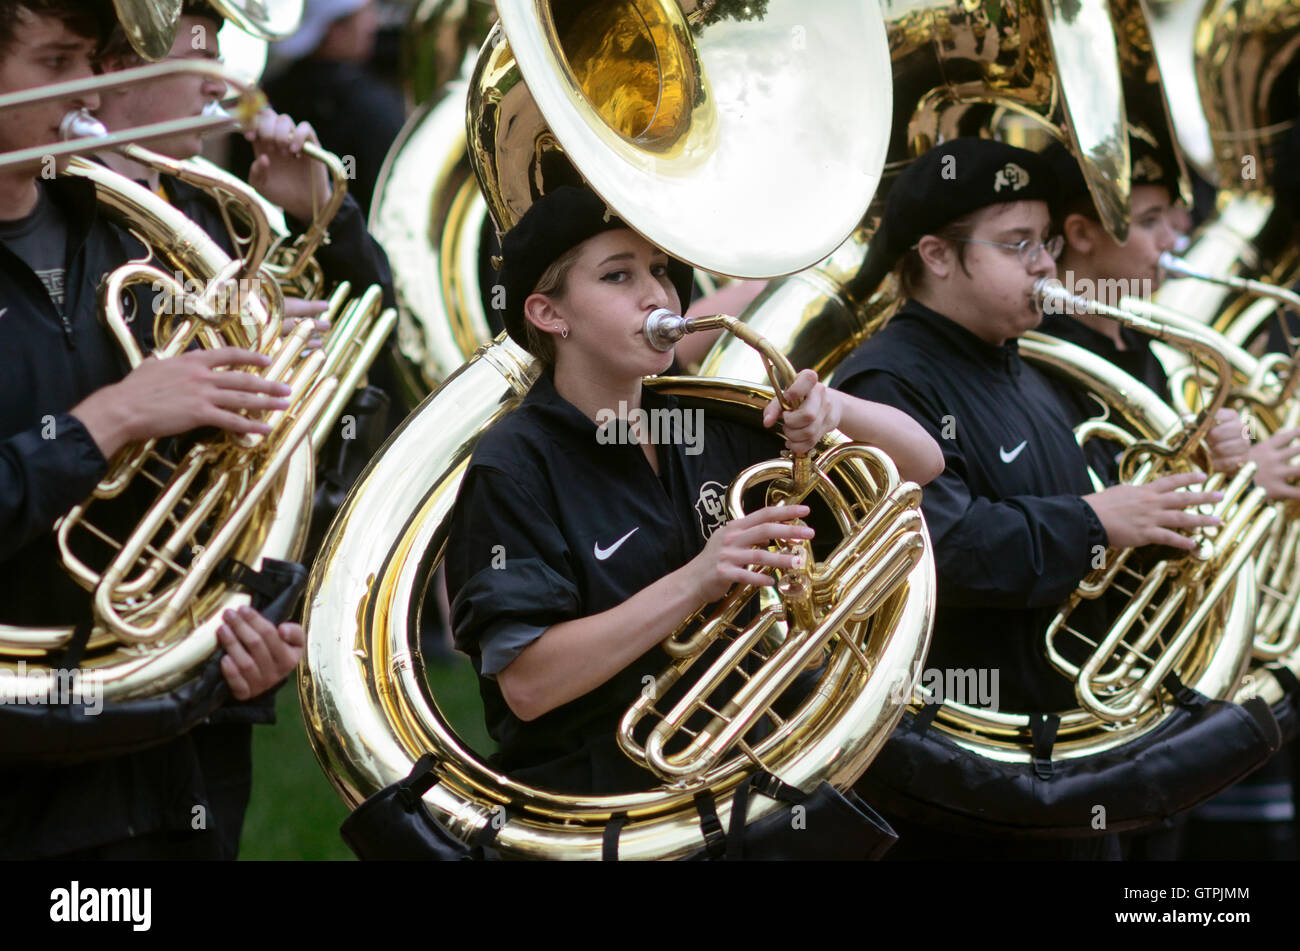 What Is A Marching Band Tuba Called